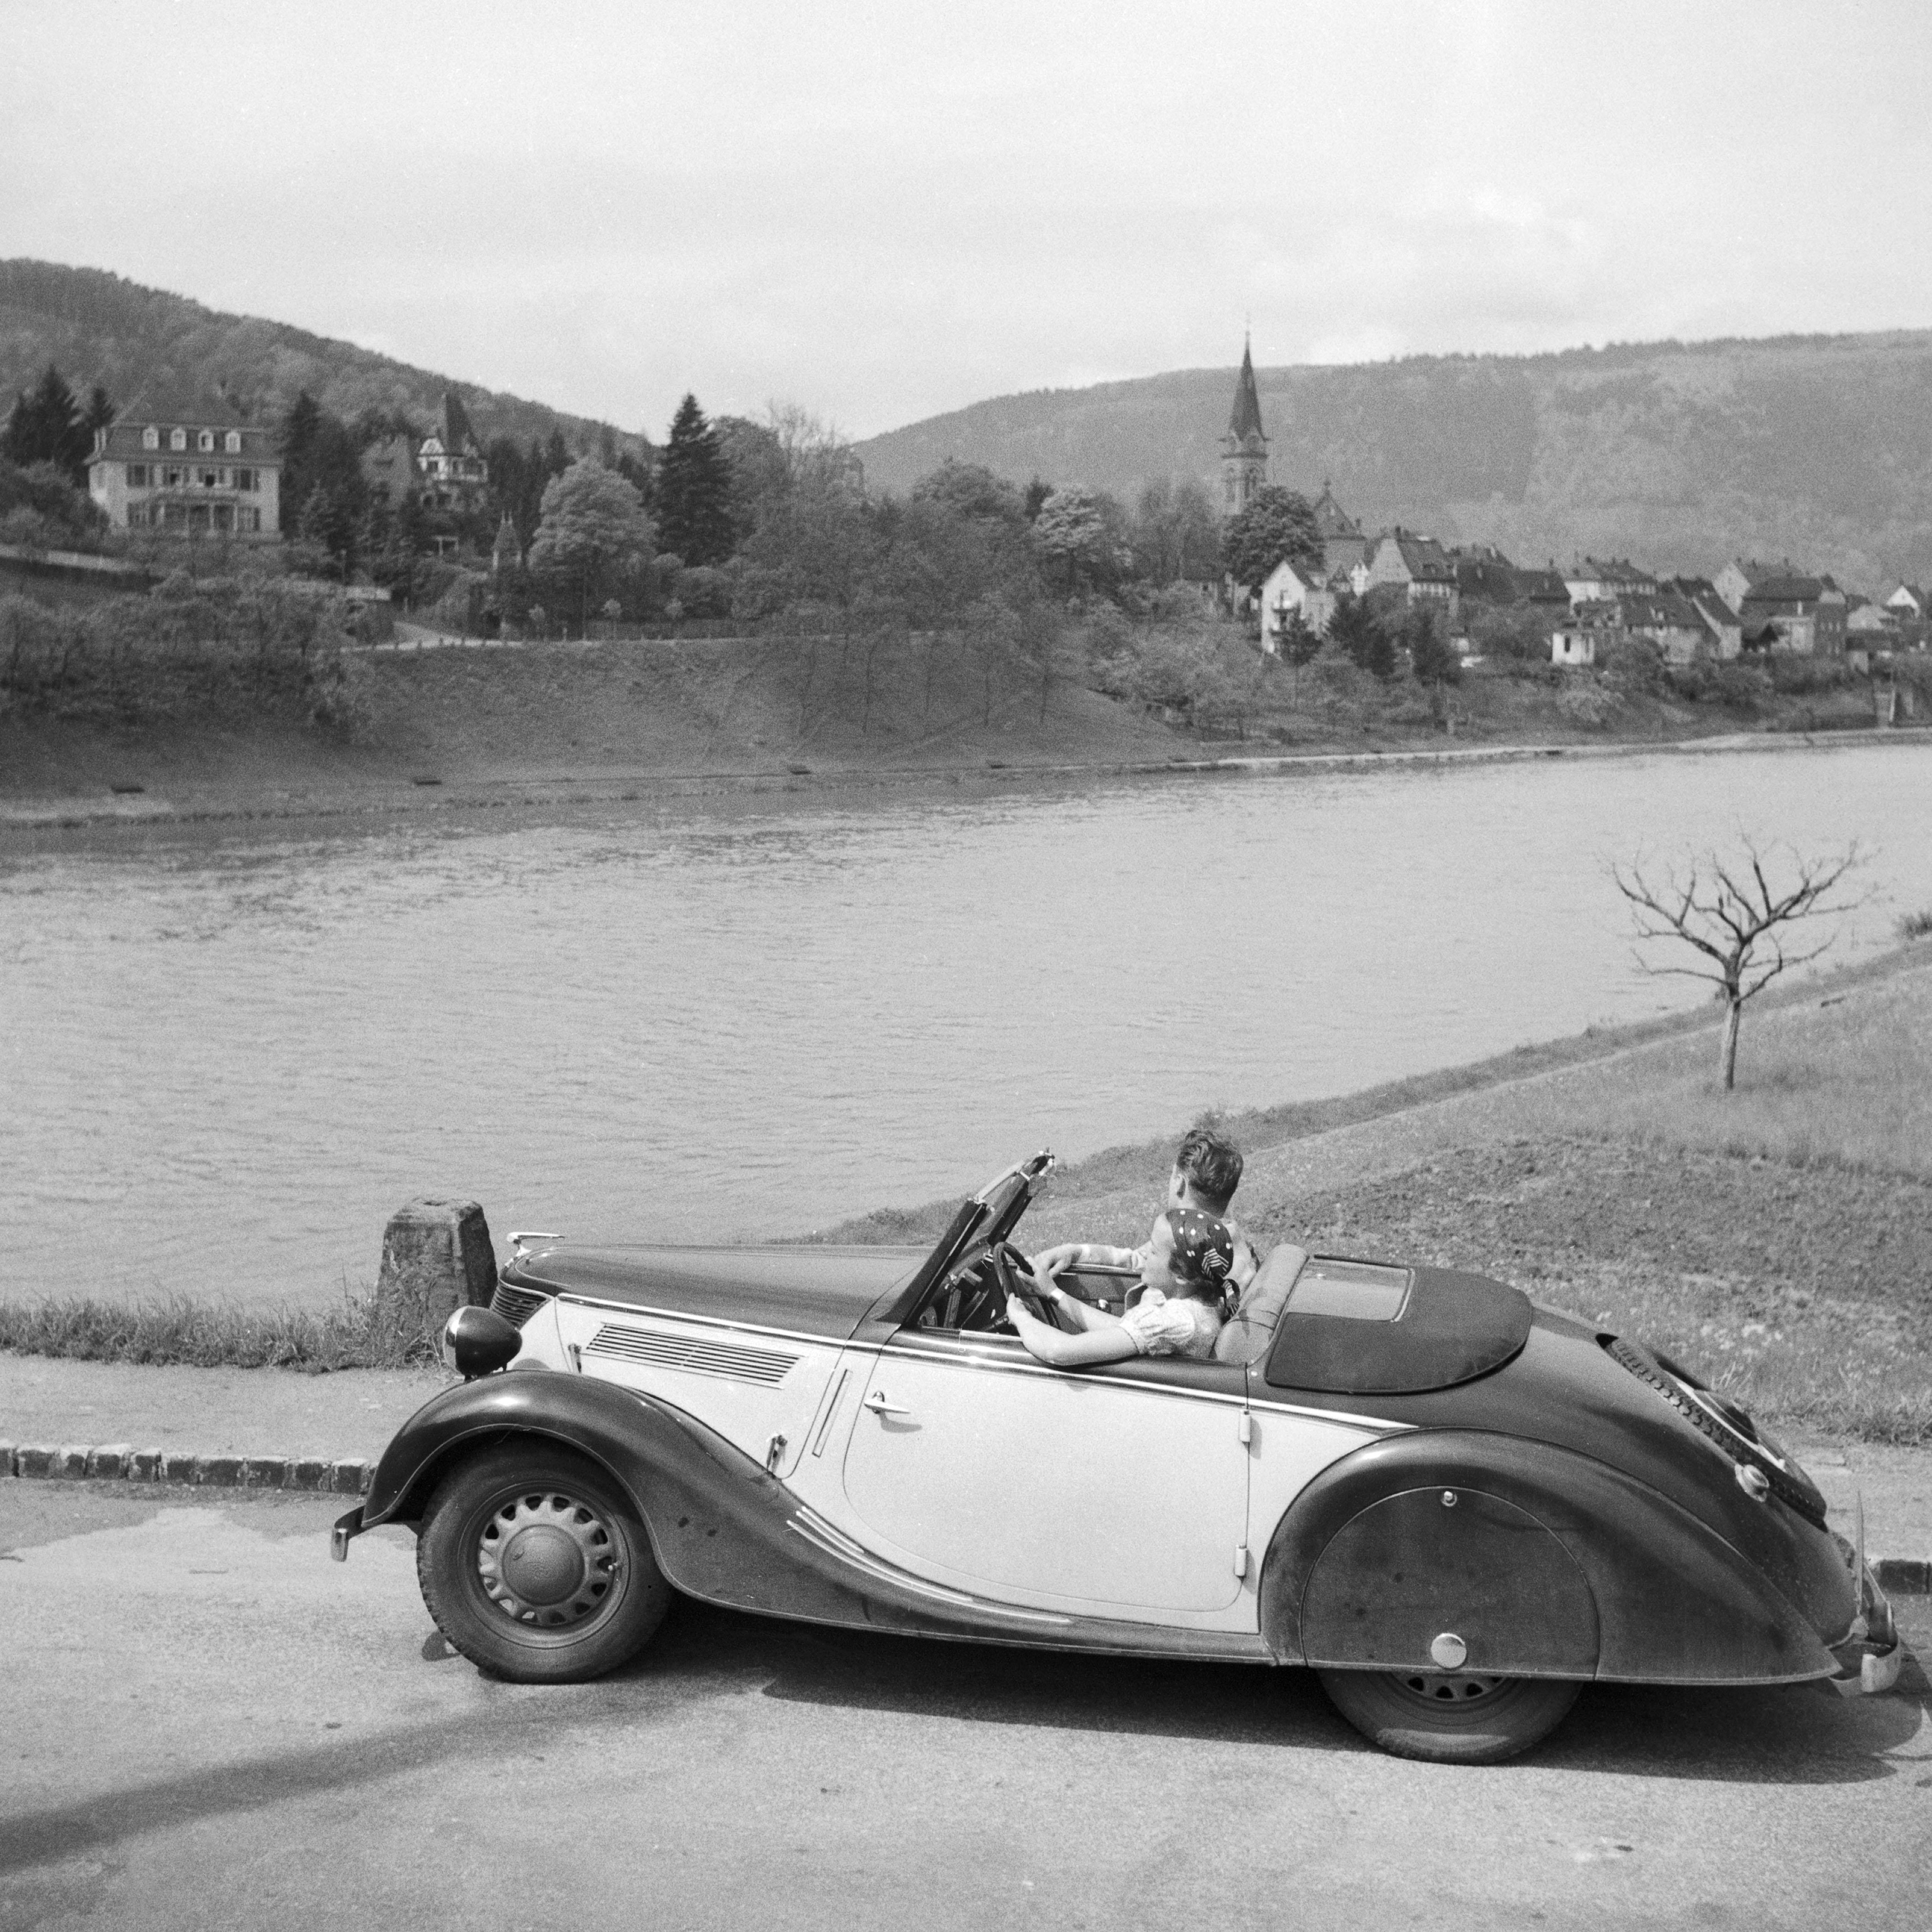 Karl Heinrich Lämmel Black and White Photograph - Giong to Neckargemuend by car near Heidelberg, Germany 1936, Printed Later 